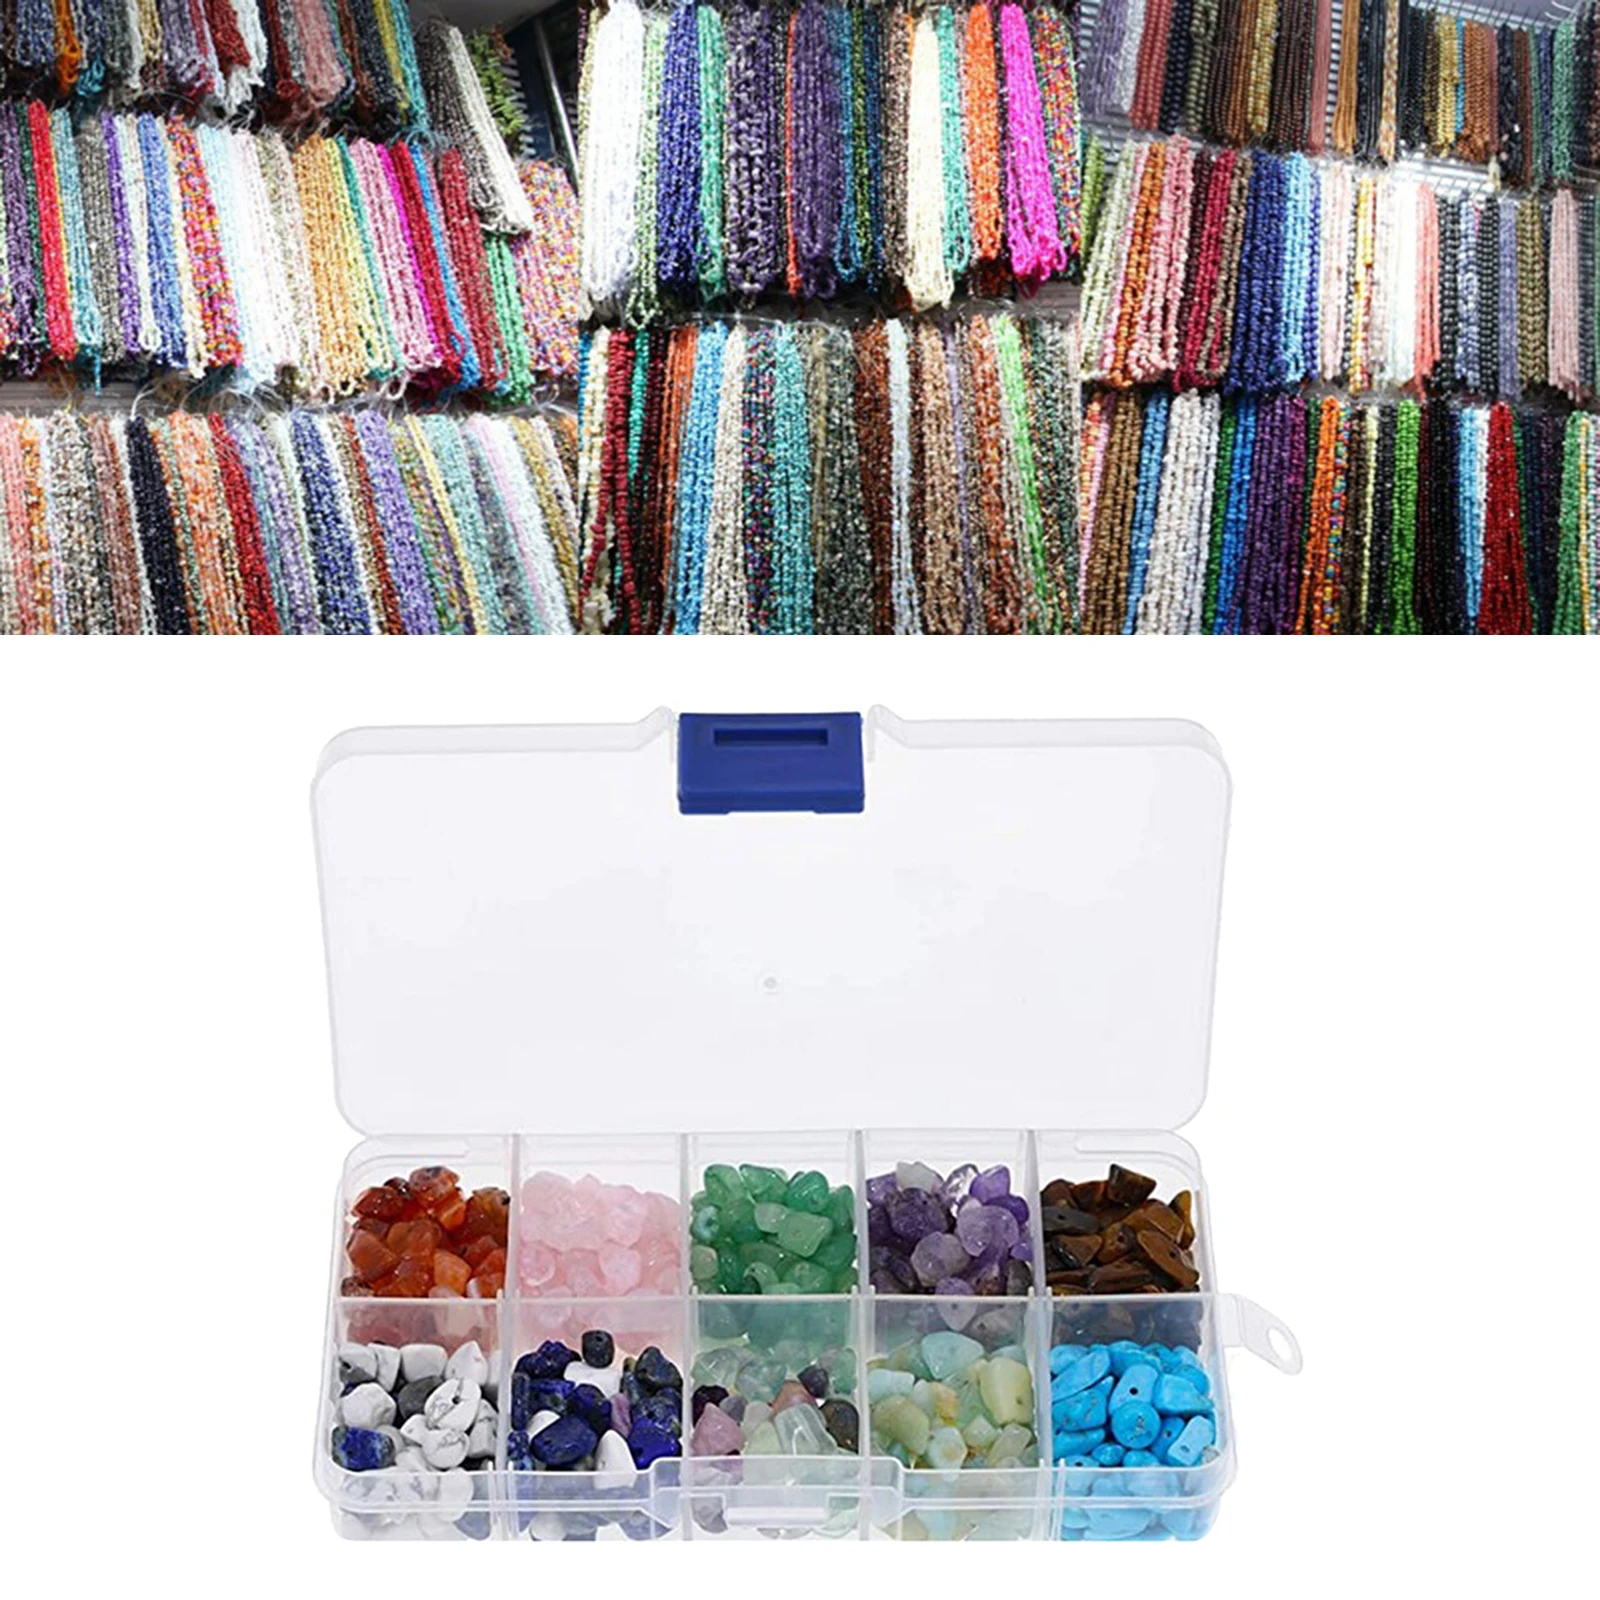 15 Grid Mixed Natural Stone Boxed Crushed Crystal Stones Chips Beads for Home Stones Degaussing Beads DIY